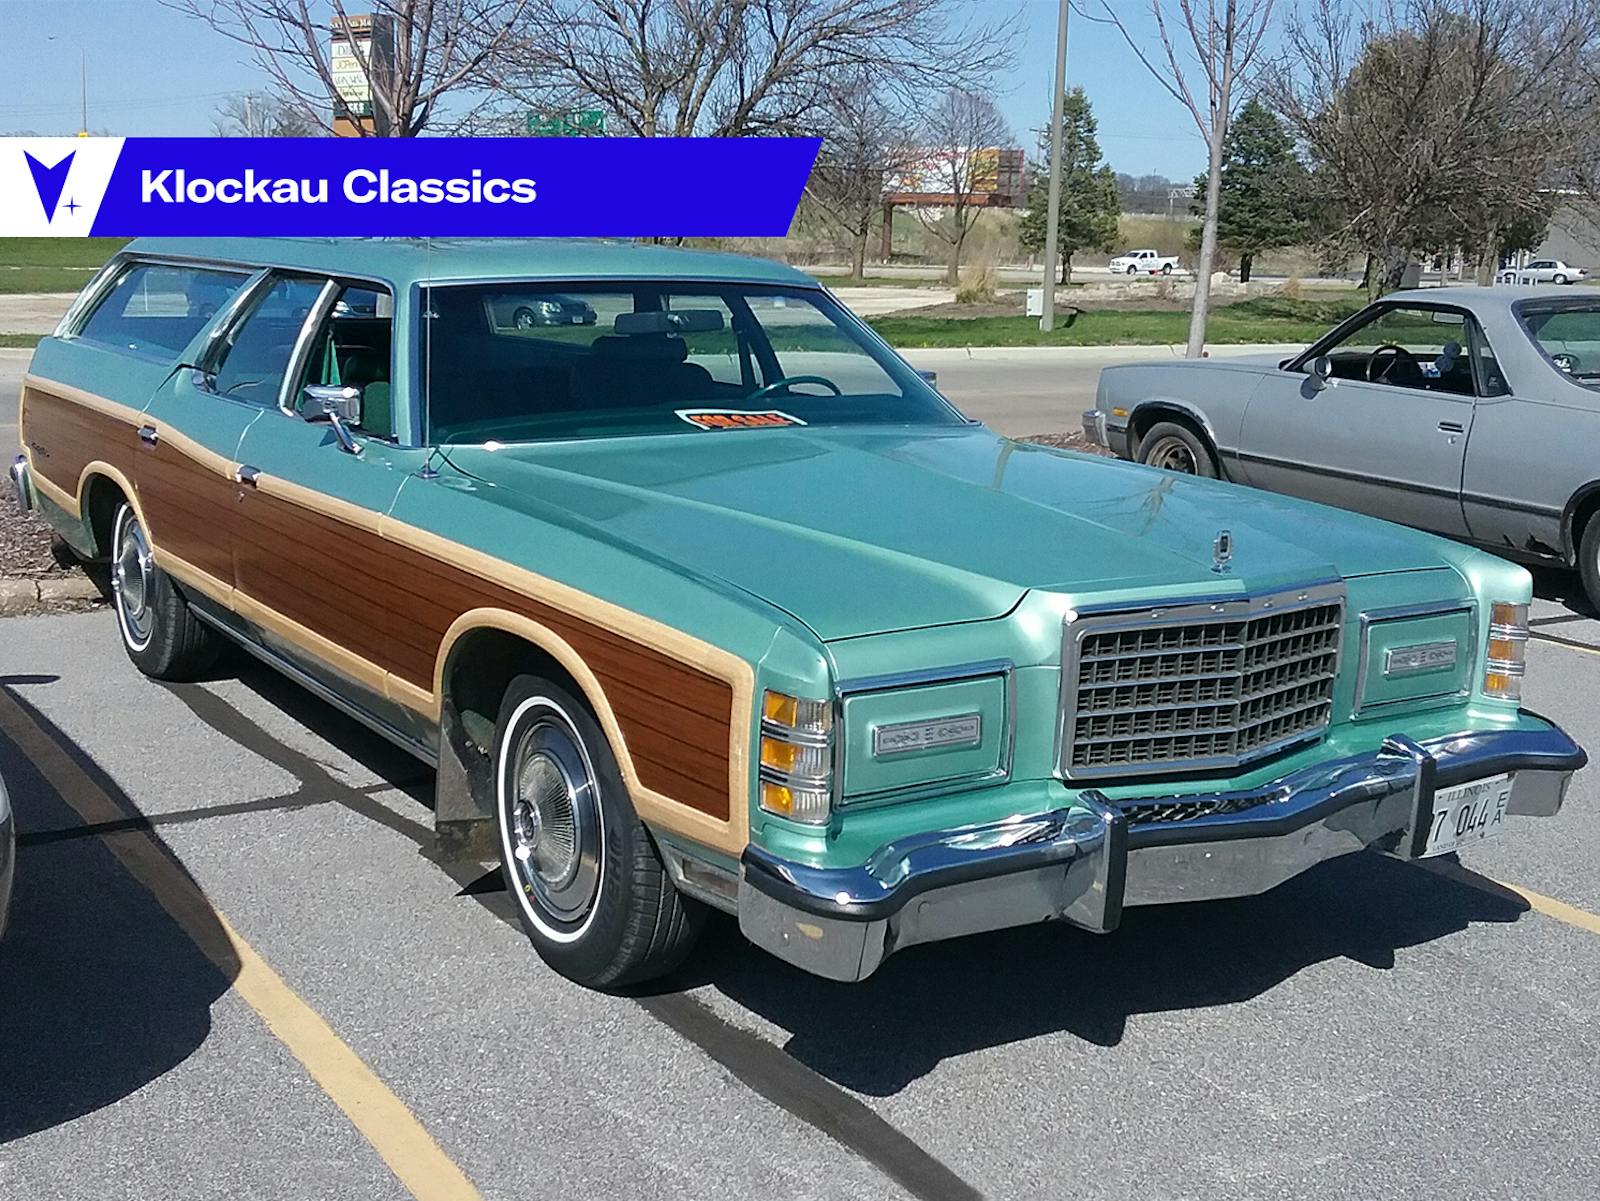 1977 Ford LTD Country Squire: Suburban luxury from the Wagonmaster ...